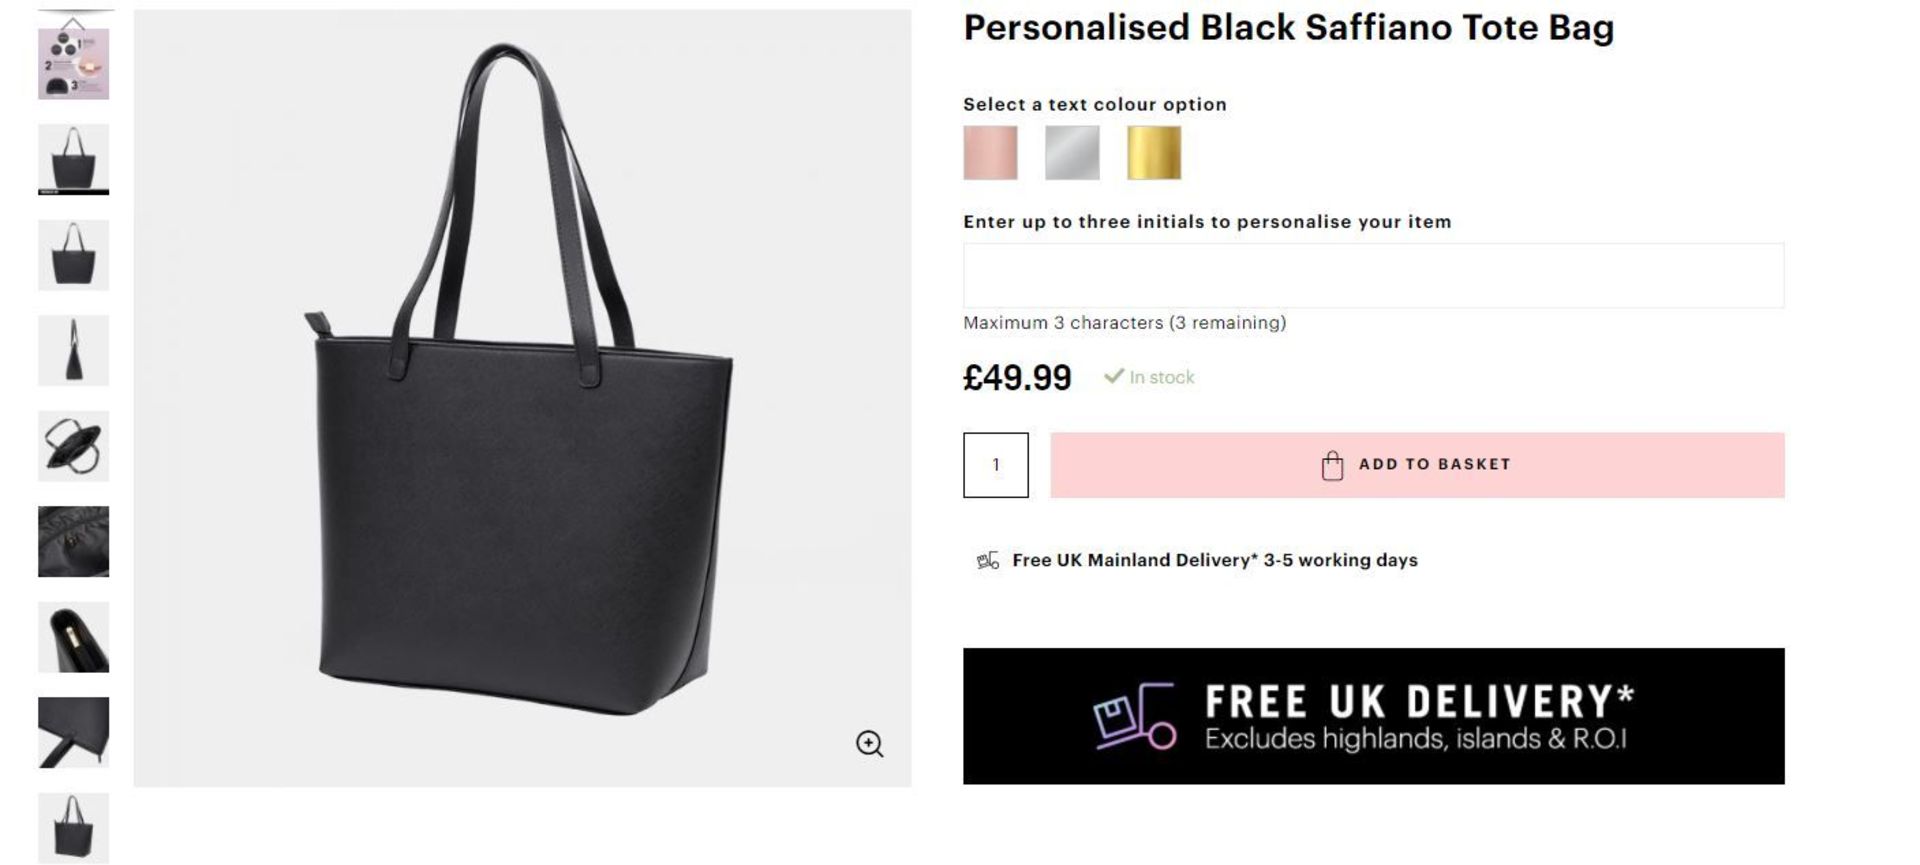 2 x NEW PACKAGED Beauti Saffiano Tote - Black. RRP £49.99 each. Note: Item is not personalised.